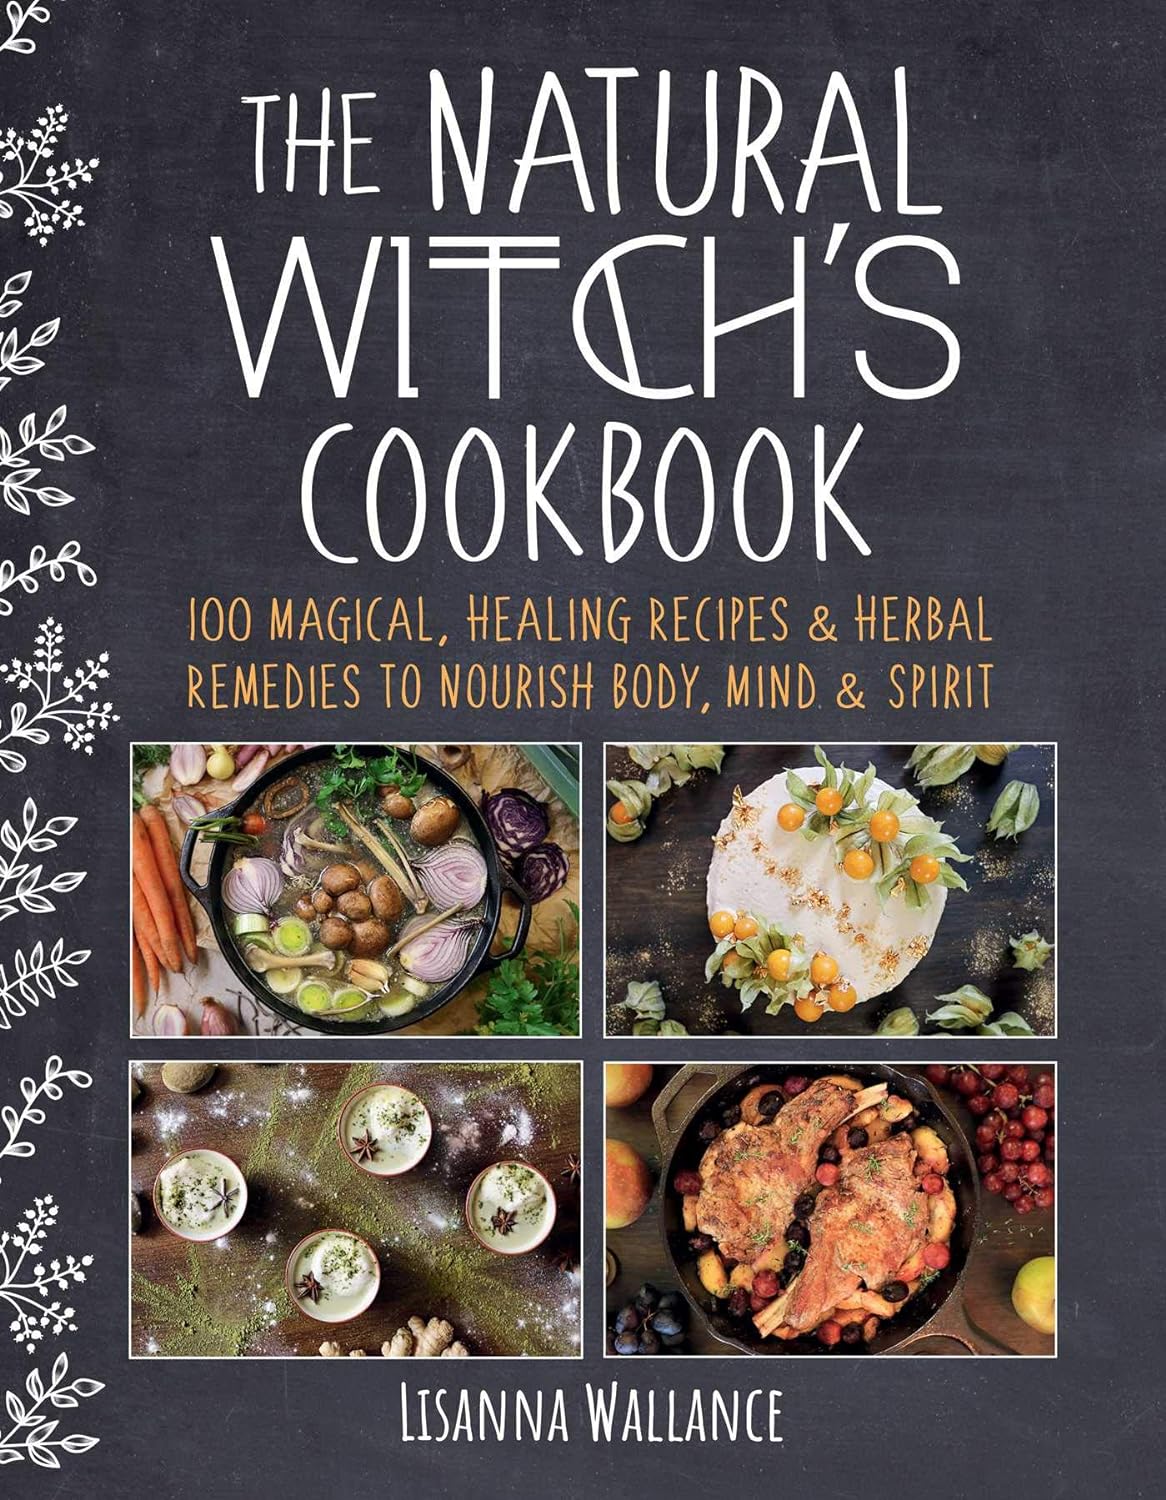 The Natural Witch's Cookbook: 100 Magical, Healing Recipes & Herbal Remedies to Nourish Body, Mind & Spirit (Lisanna Wallance, Grace McQuillan)